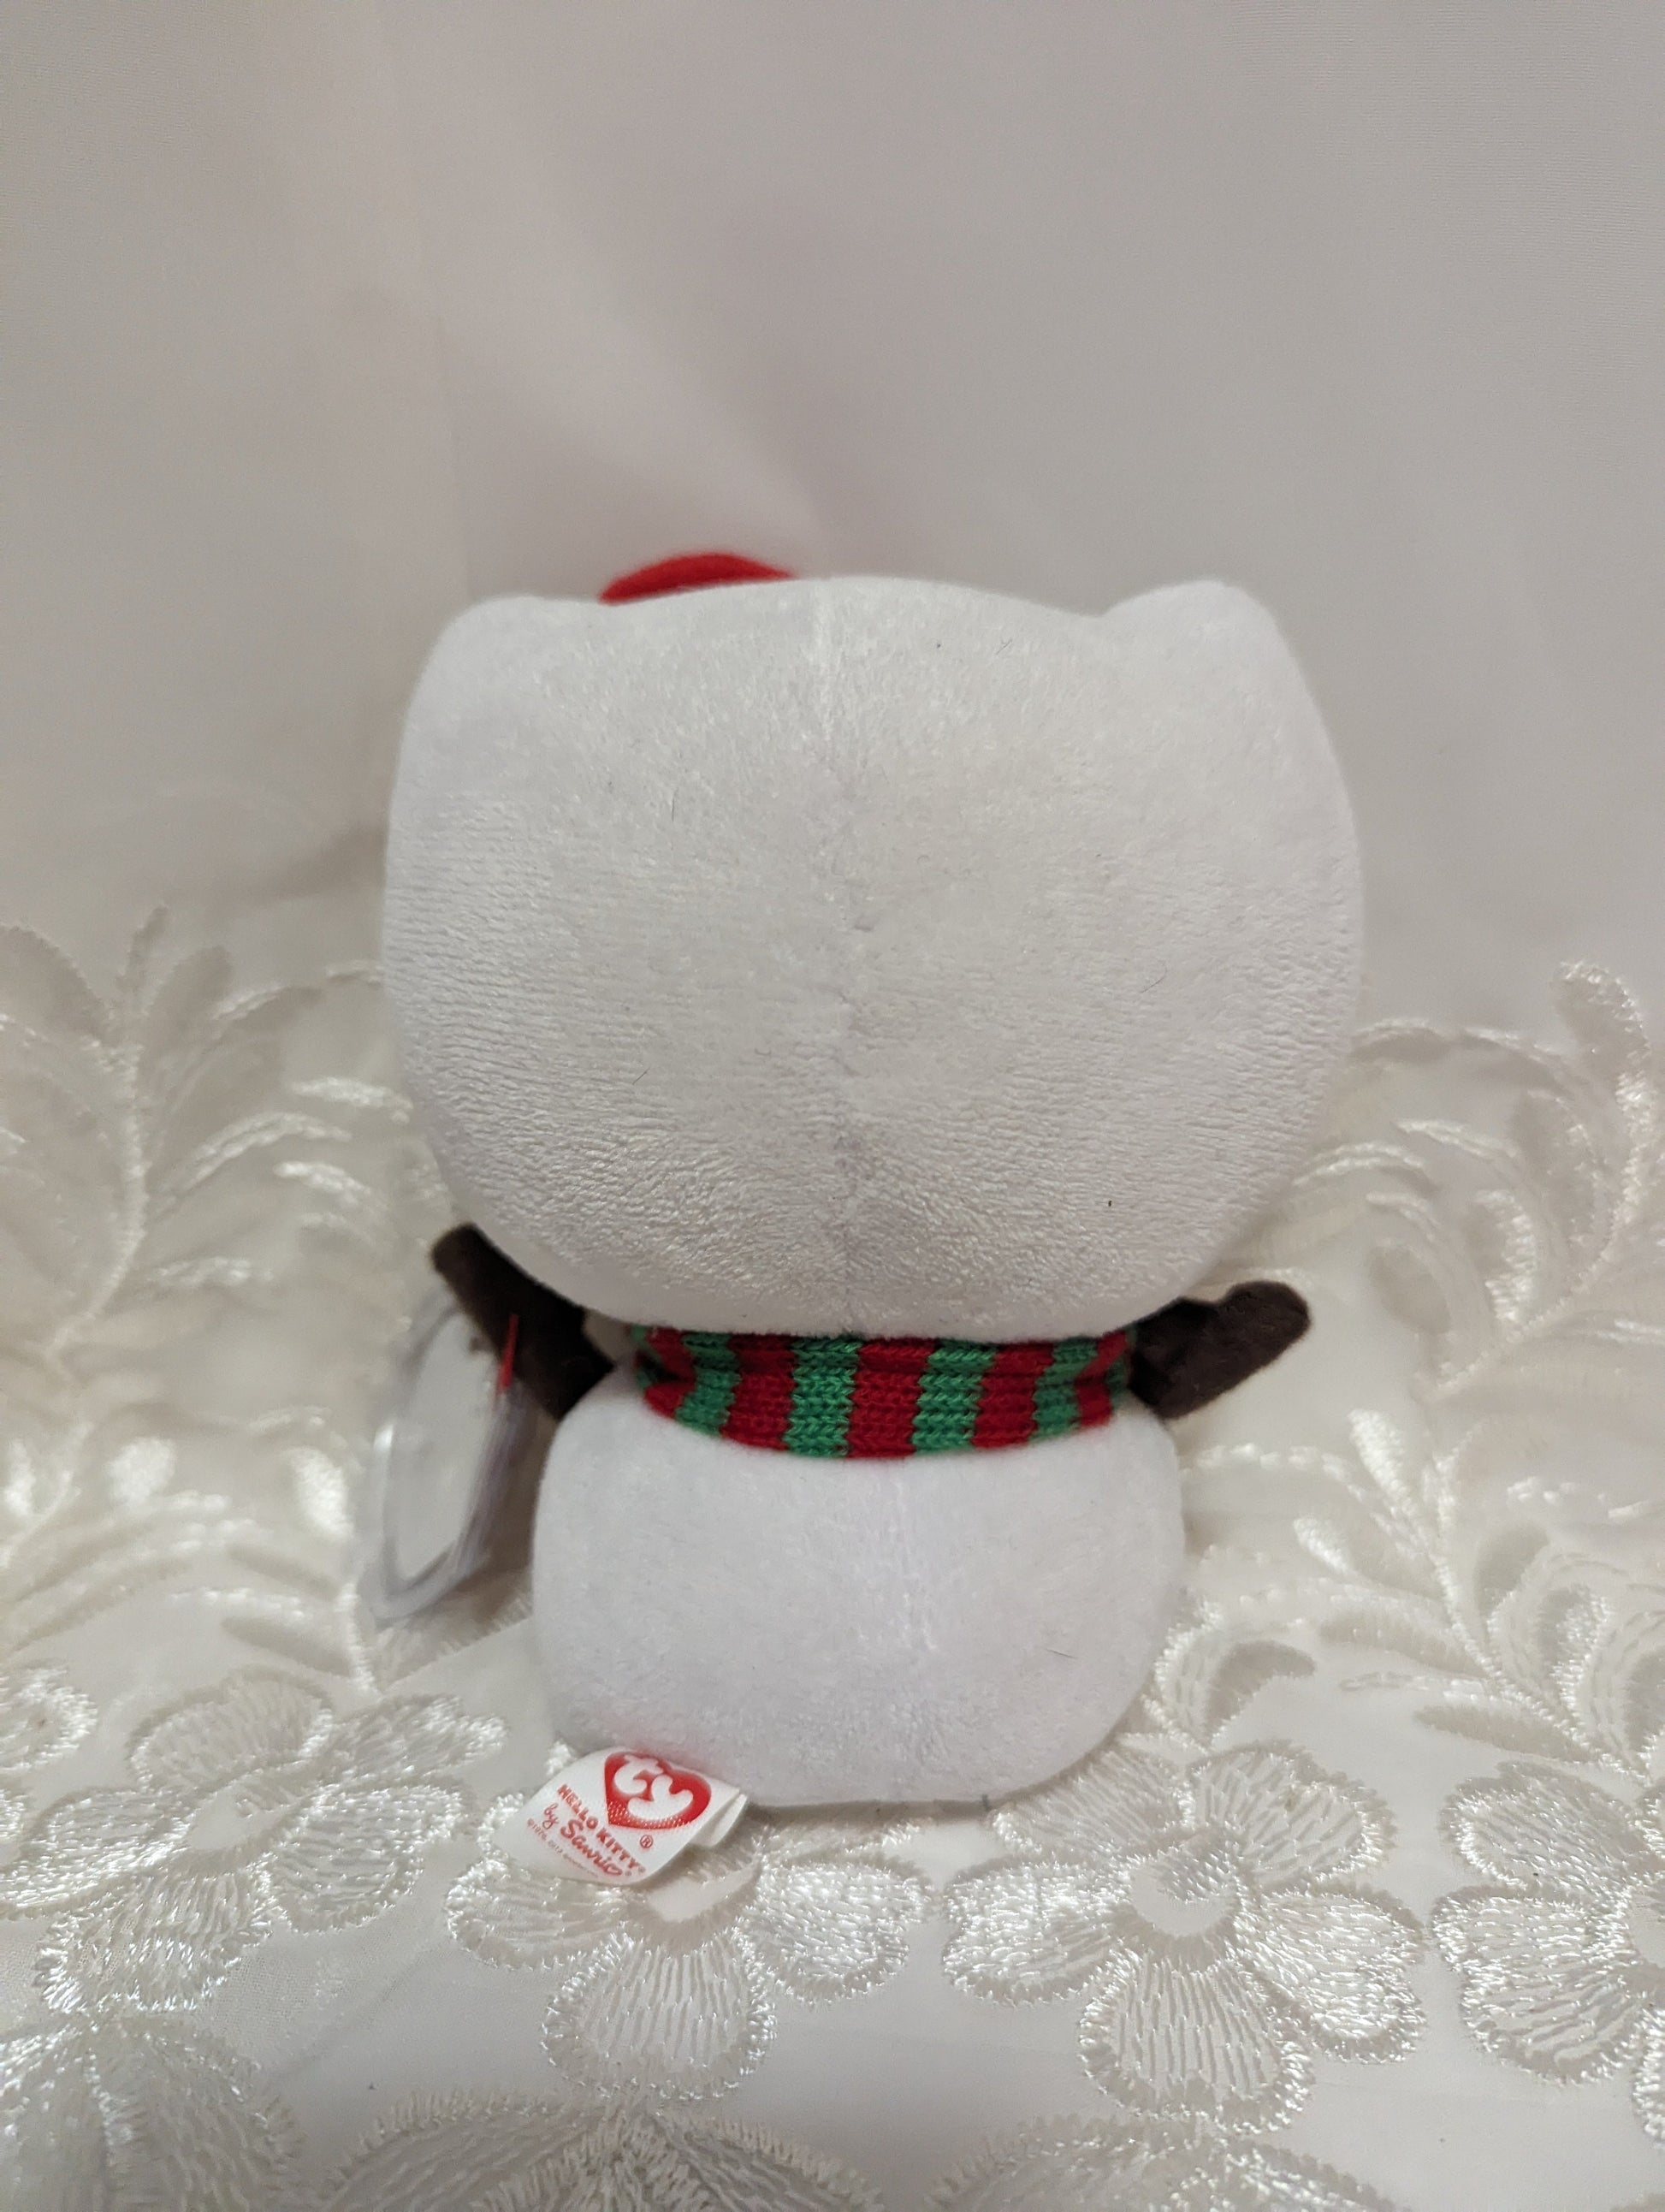 Ty Beanie Baby - Hello Kitty The Snowman (5.5 in) Creased Tag - Vintage Beanies Canada